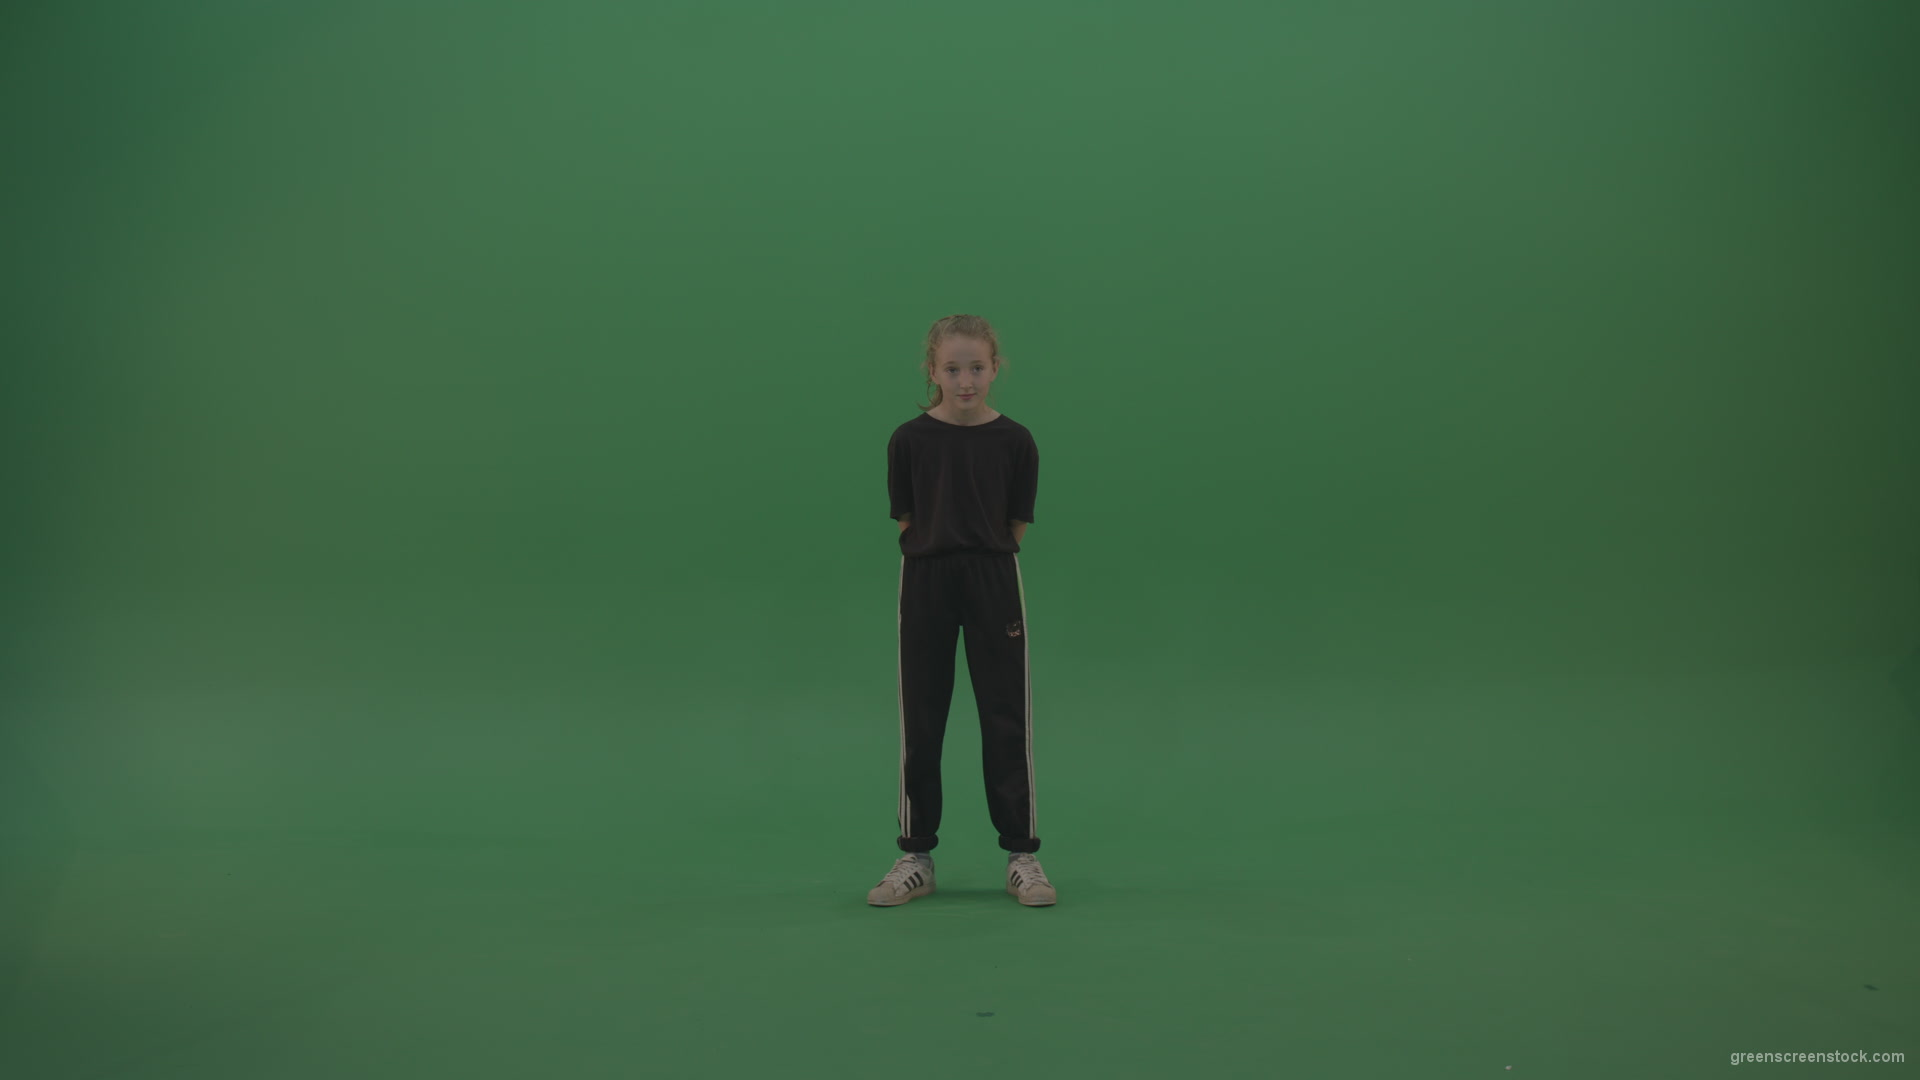 Incredible_Dance_Hip_Hop_Moves_From_Young_SmalKid_Female_Wearing_Black_Sweat_Suite_And_White_Trainers_On_Green_Screen_Wall_Background_001 Green Screen Stock